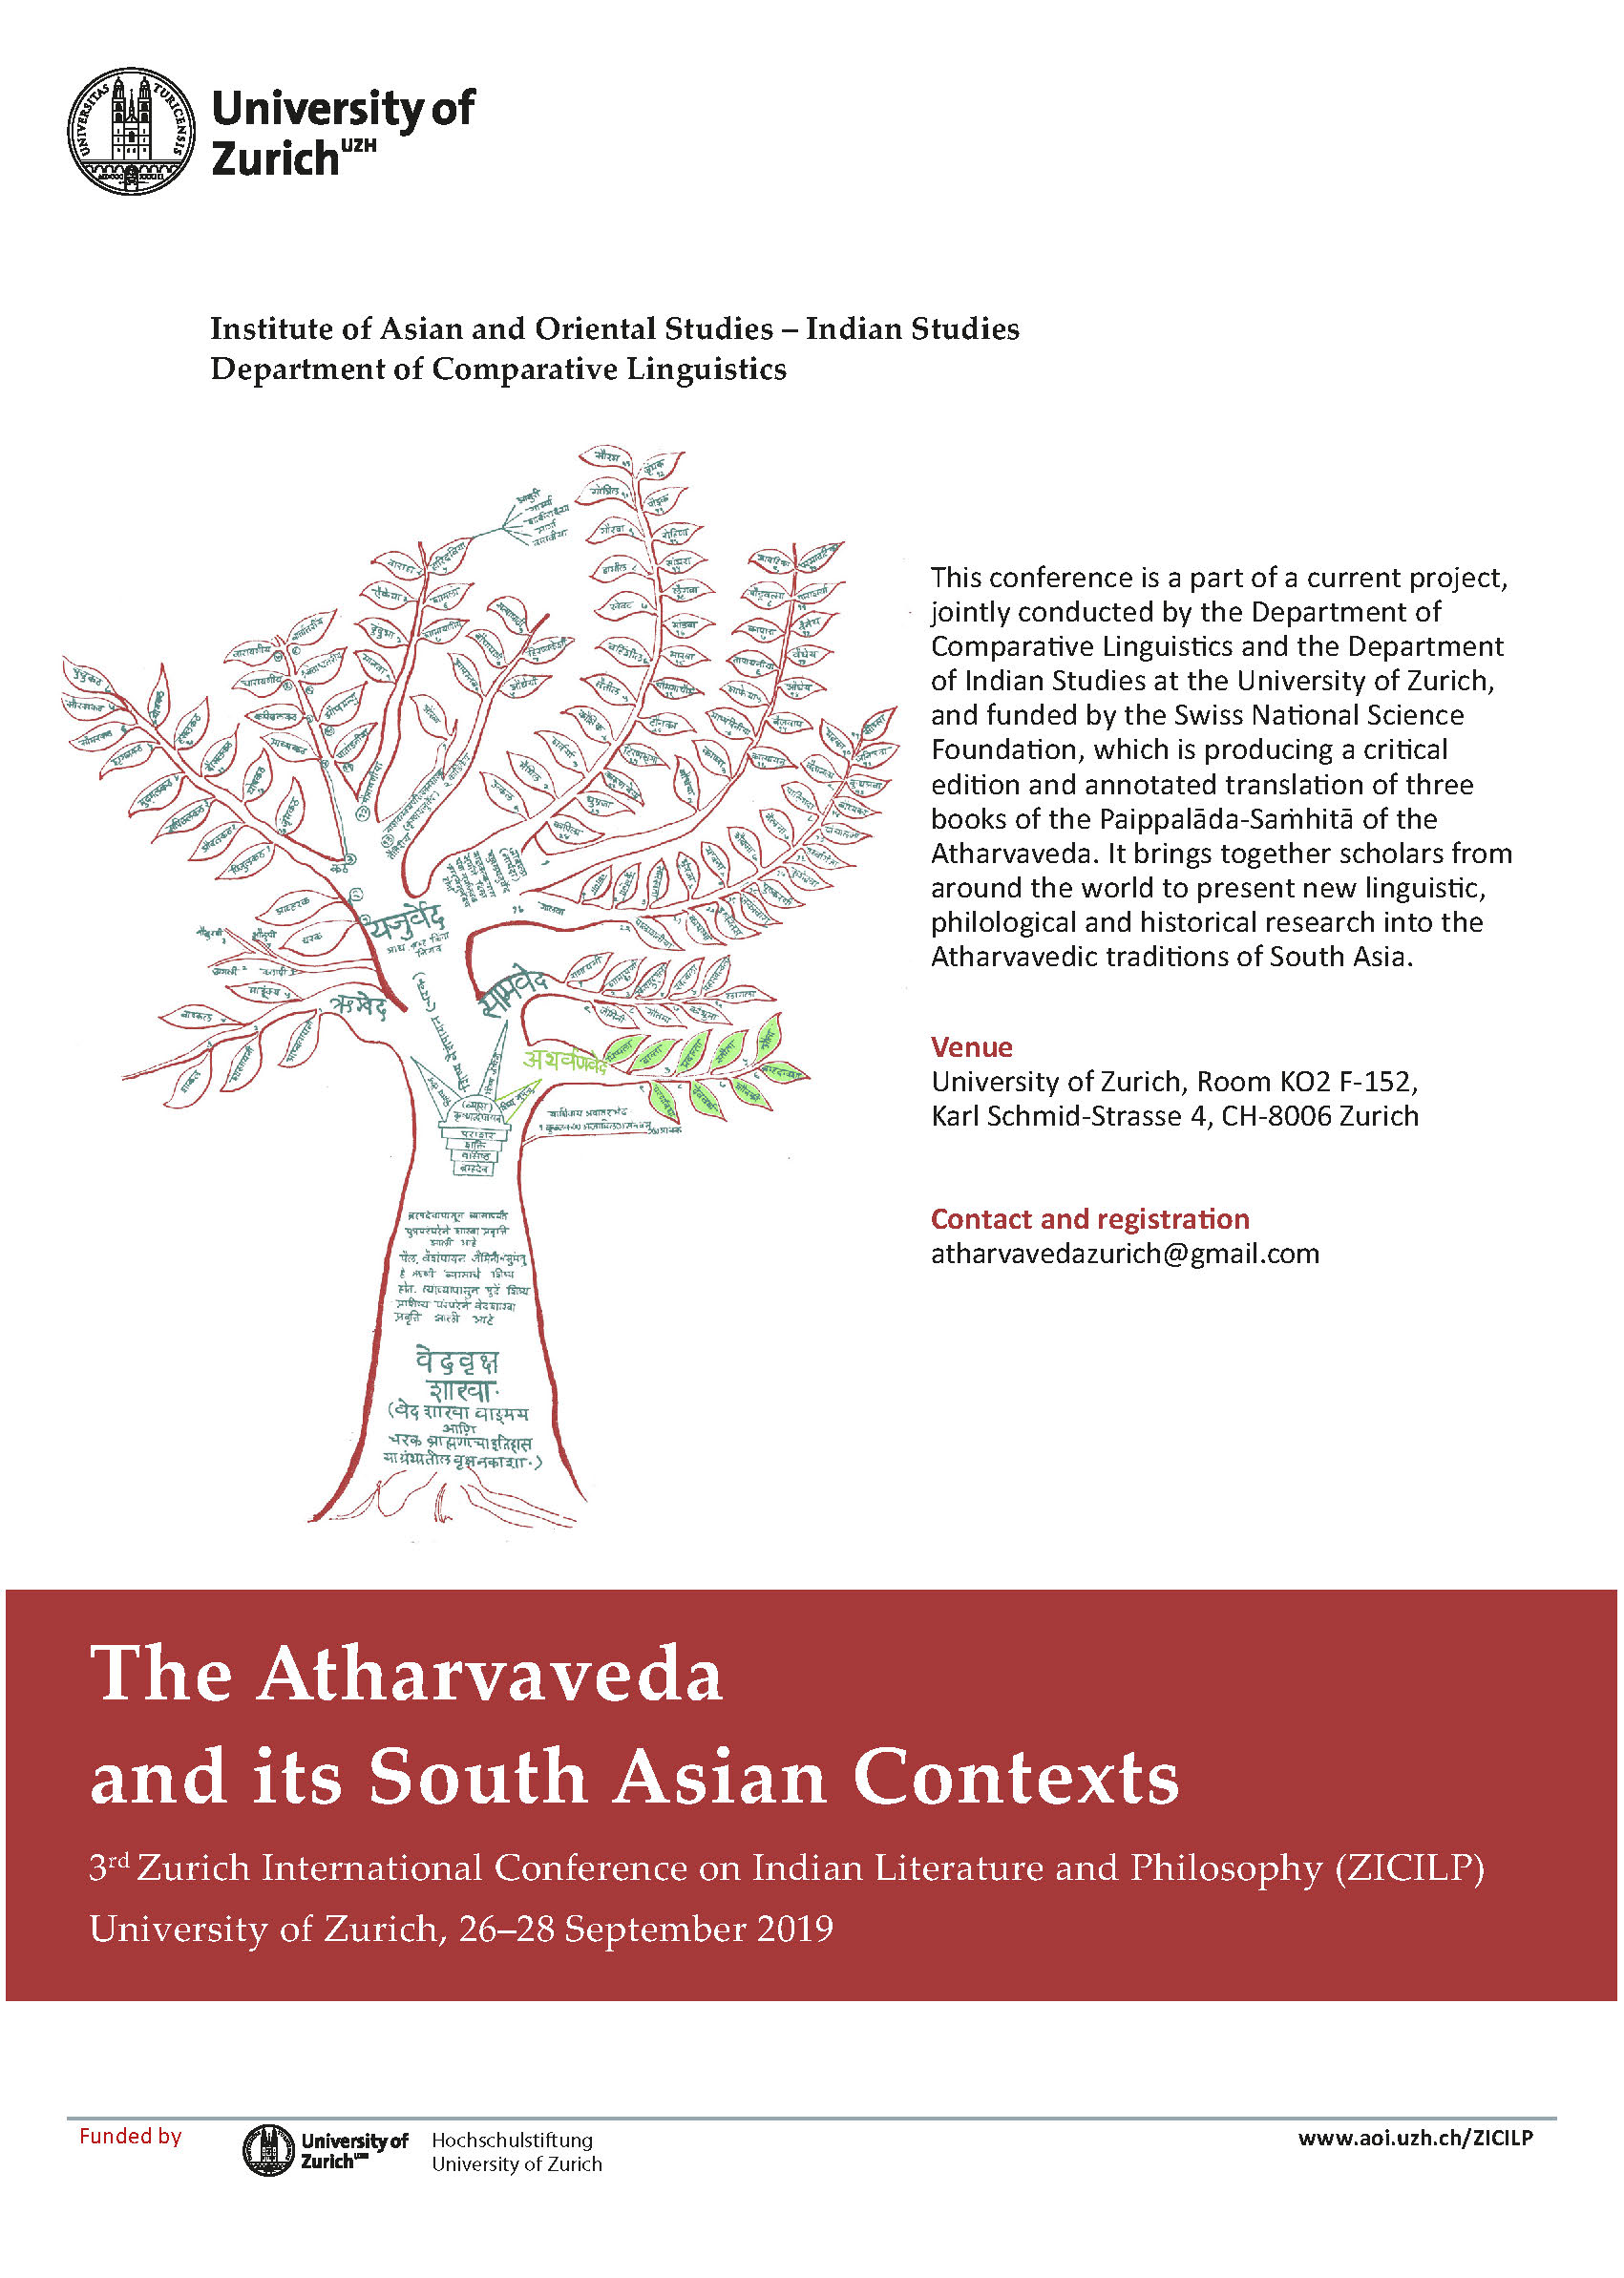 The Atharvaveda and its South Asian Contexts. 3rd Zurich International Conference on Indian Literature and Philosophy (ZICILP)